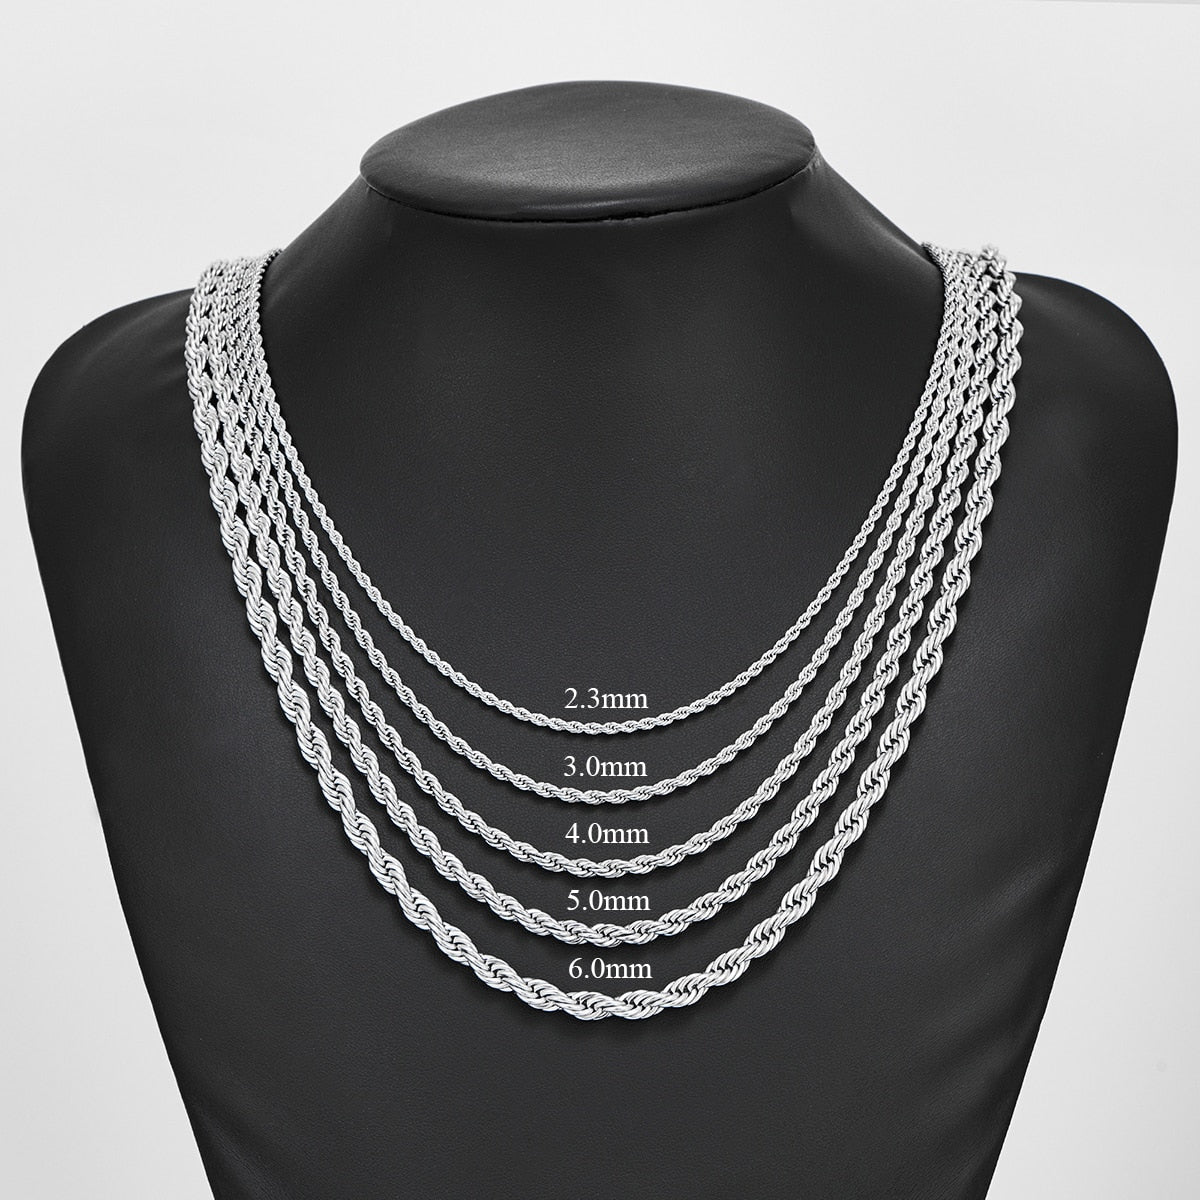 Adjustable Rope Chain - Different Drips